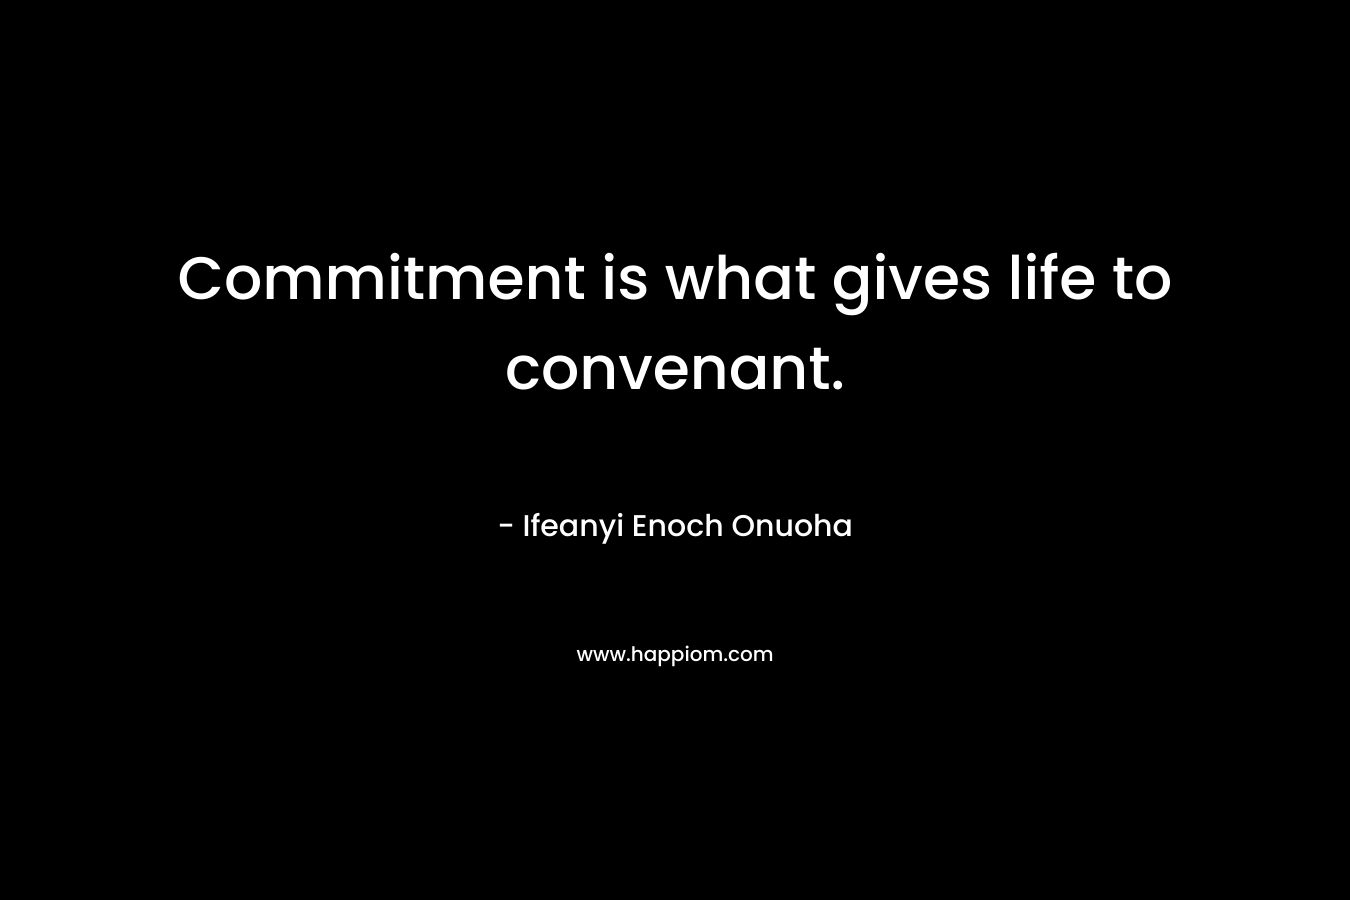 Commitment is what gives life to convenant.